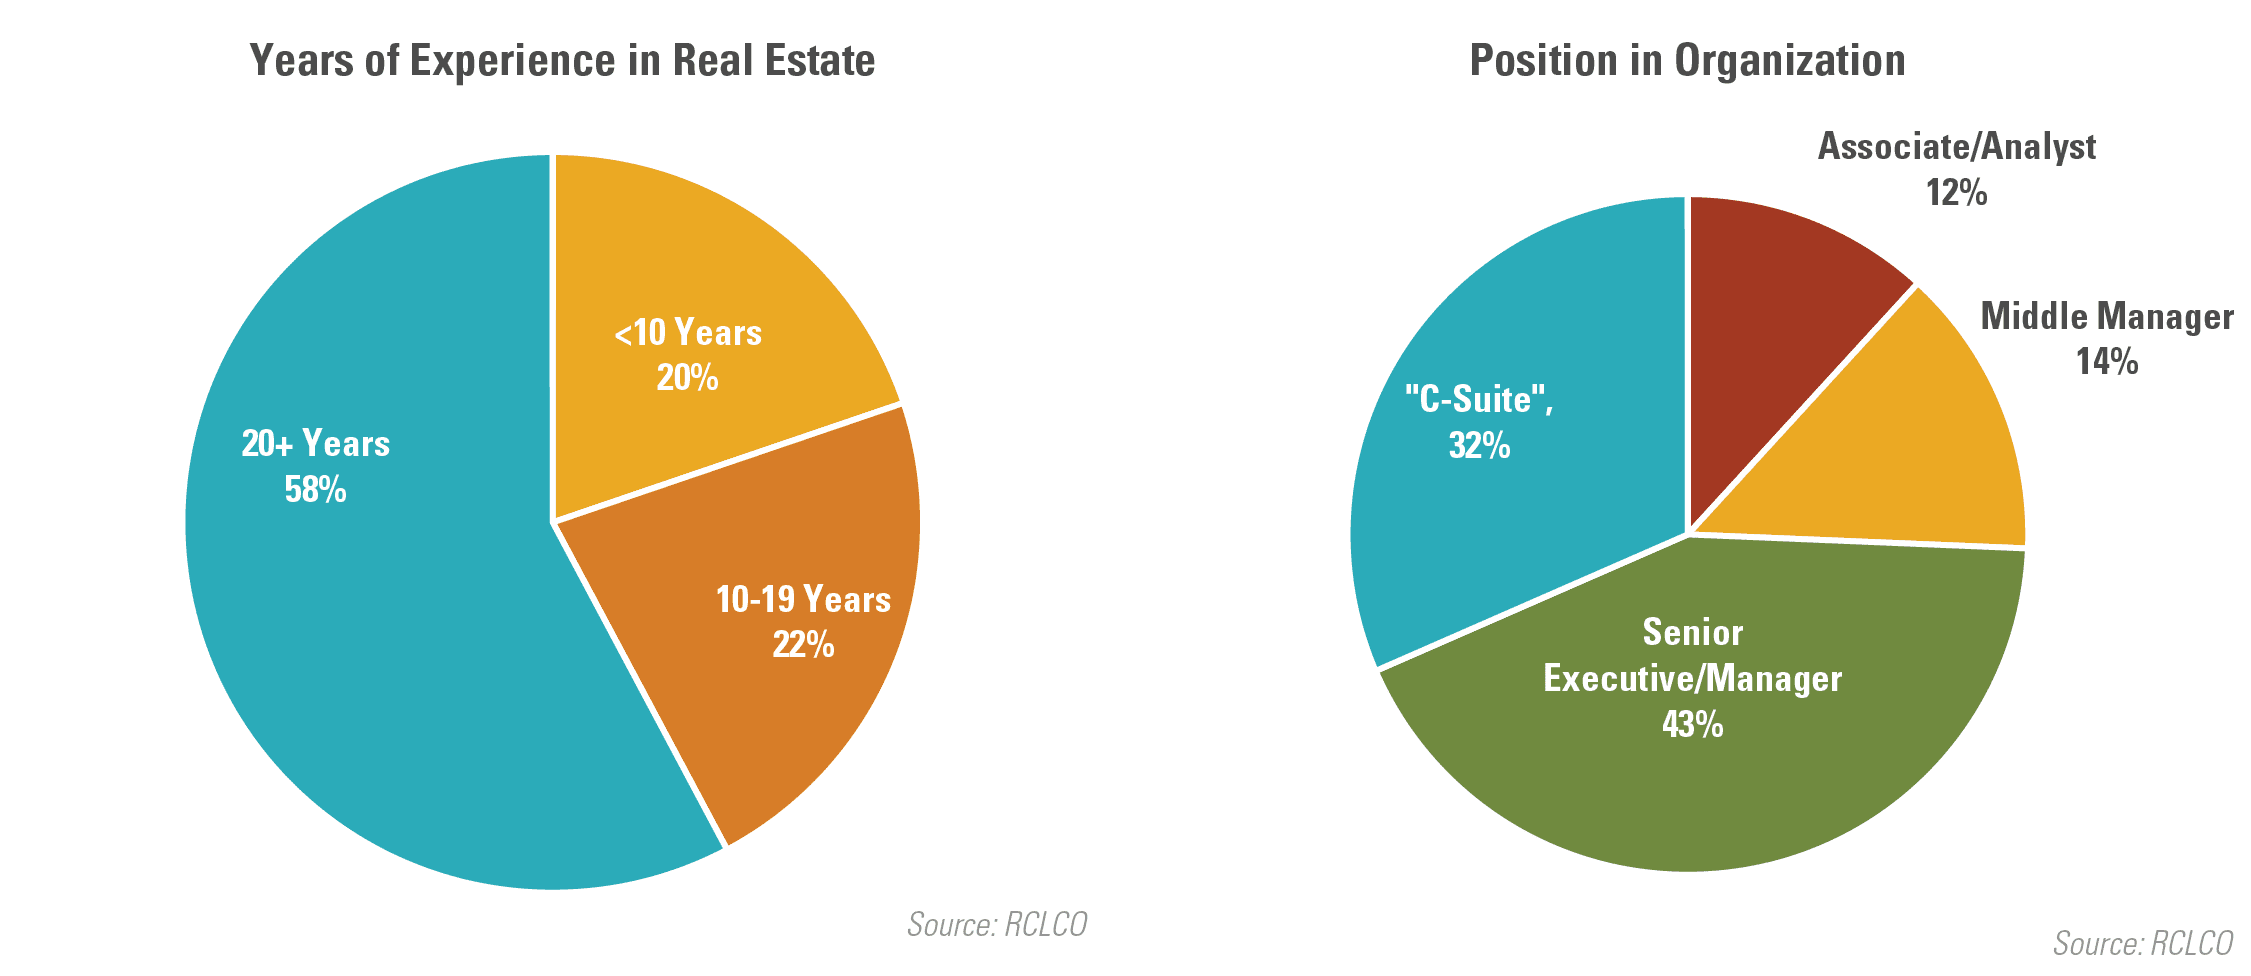 Years of Experience in Real Estate